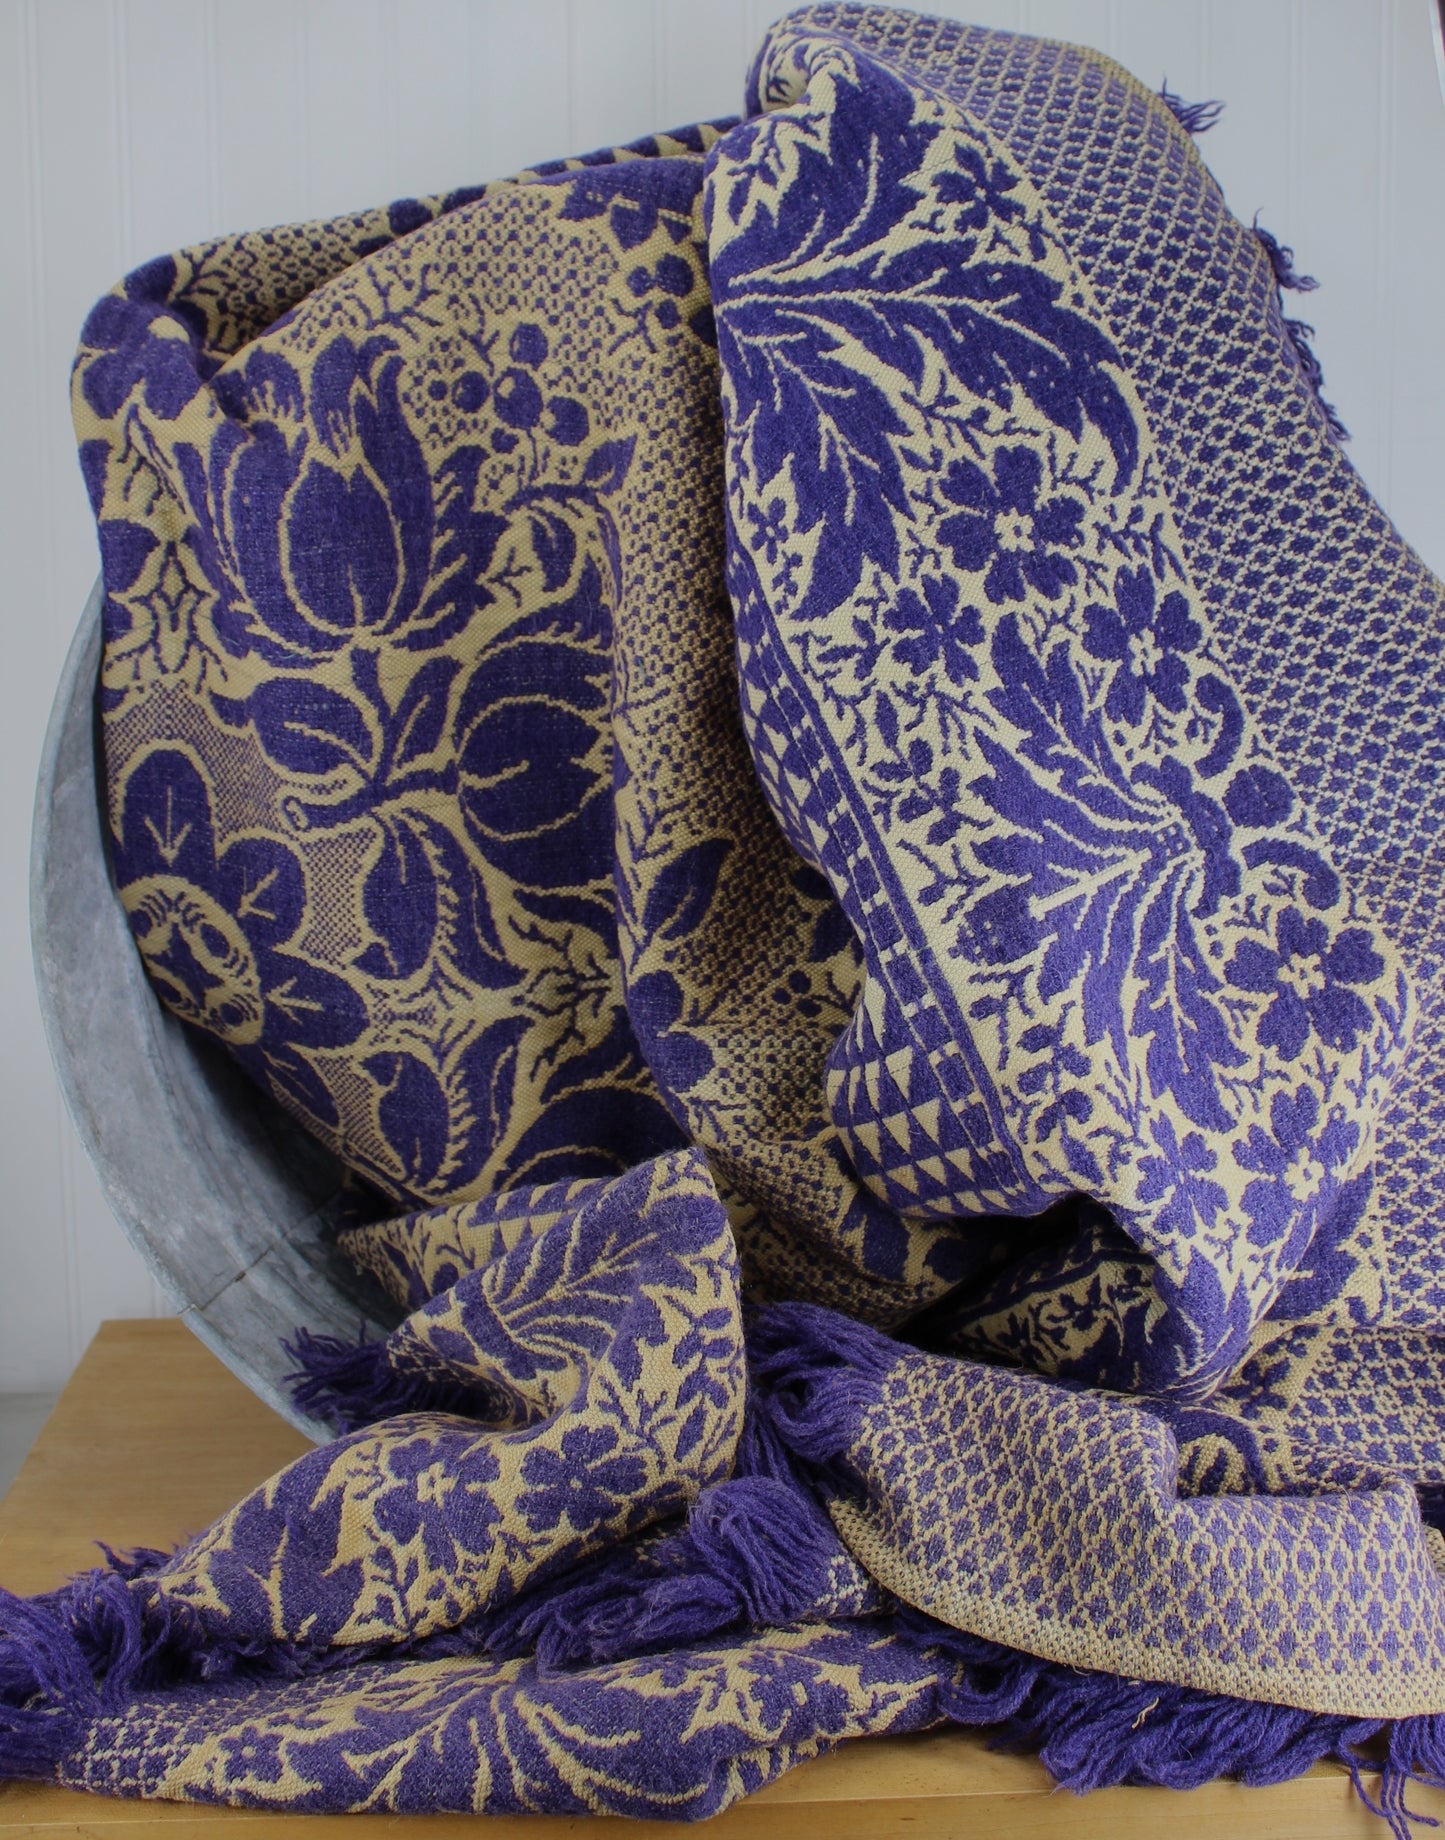 Antique Jacquard Coverlet - Indigo Purple Floral Medallion Geometric - Initials A E - Intricate All Over Design acanthus leaves